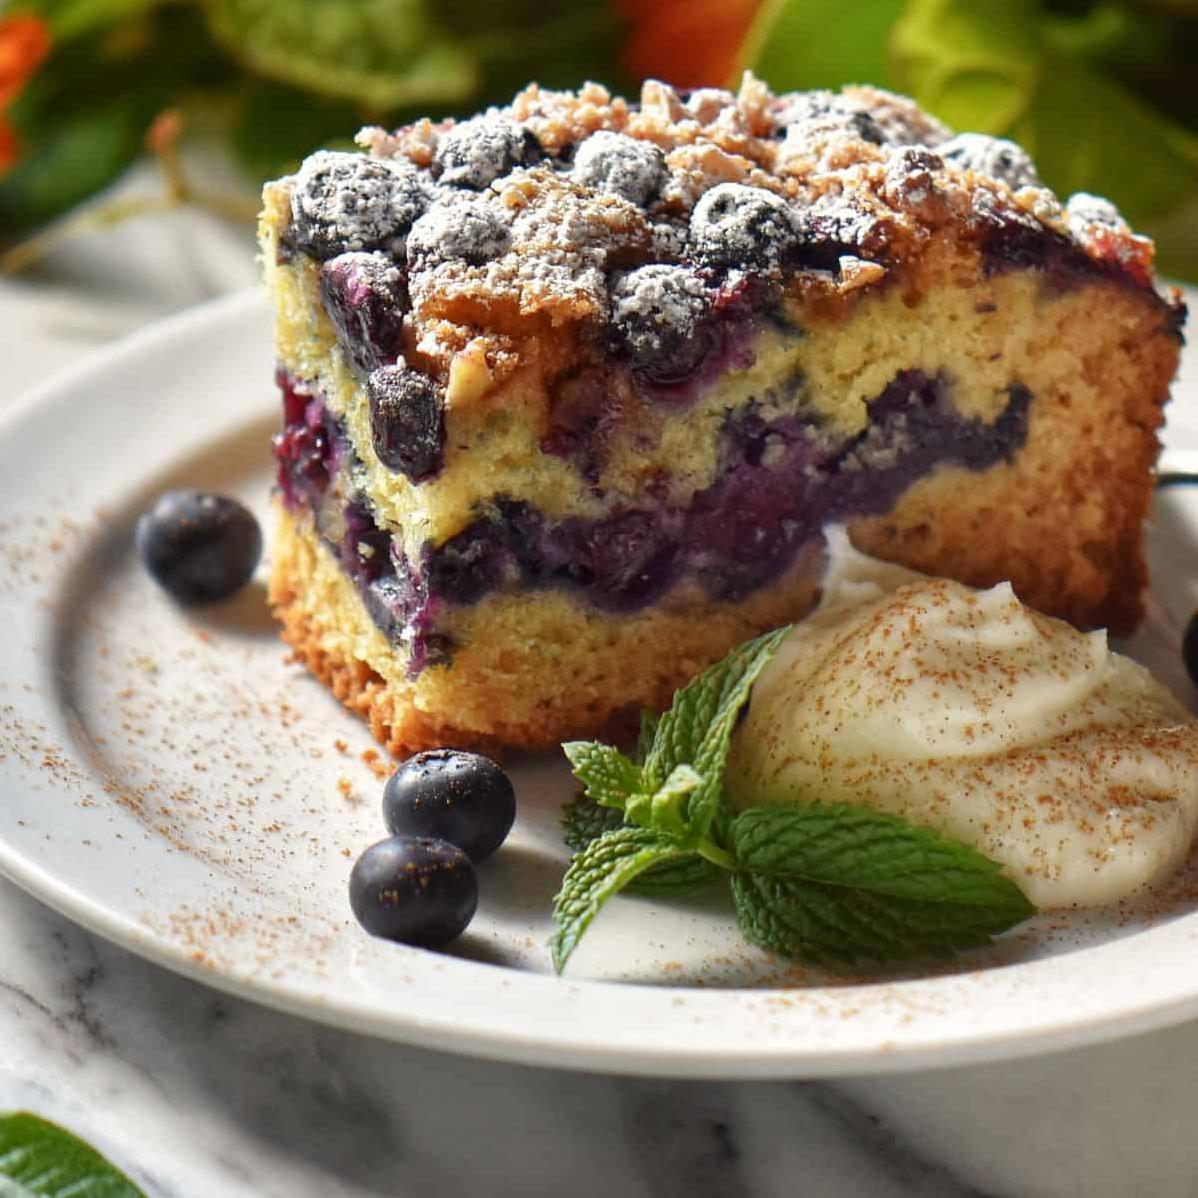  Dive into this heavenly blueberry-packed coffee cake!